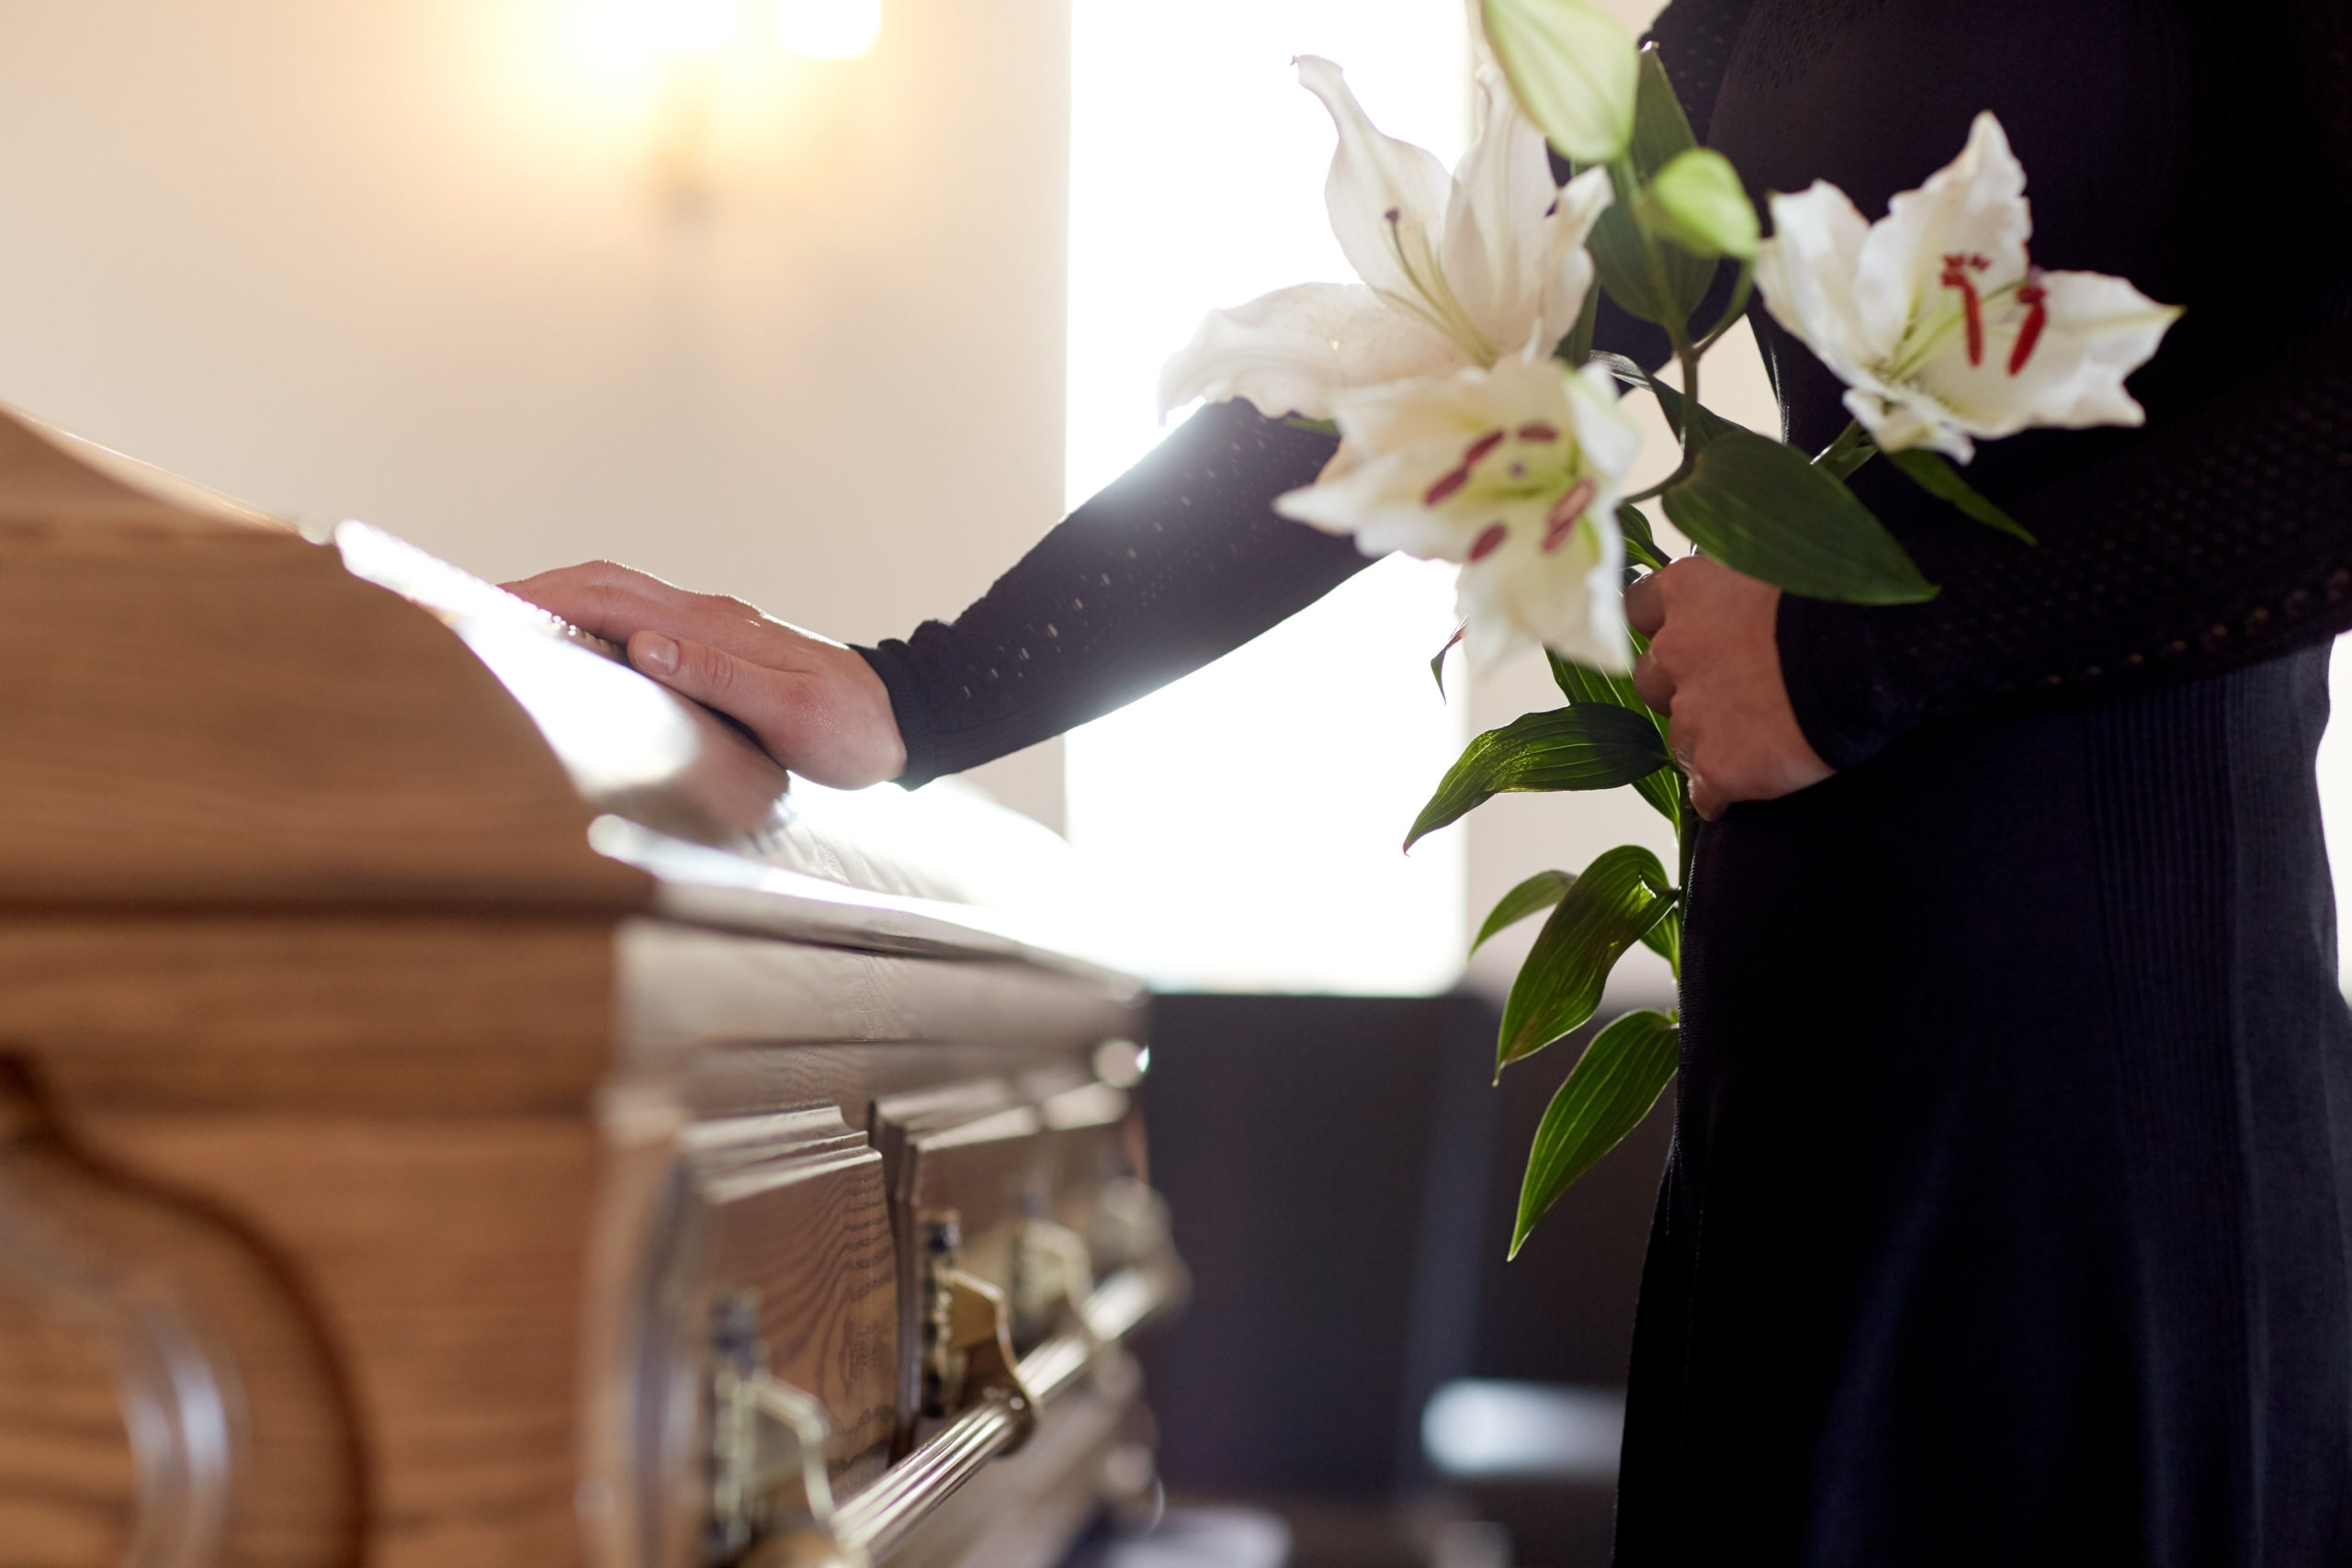 widow touches casket, holding flowers and worried about how to get help with funeral expenses